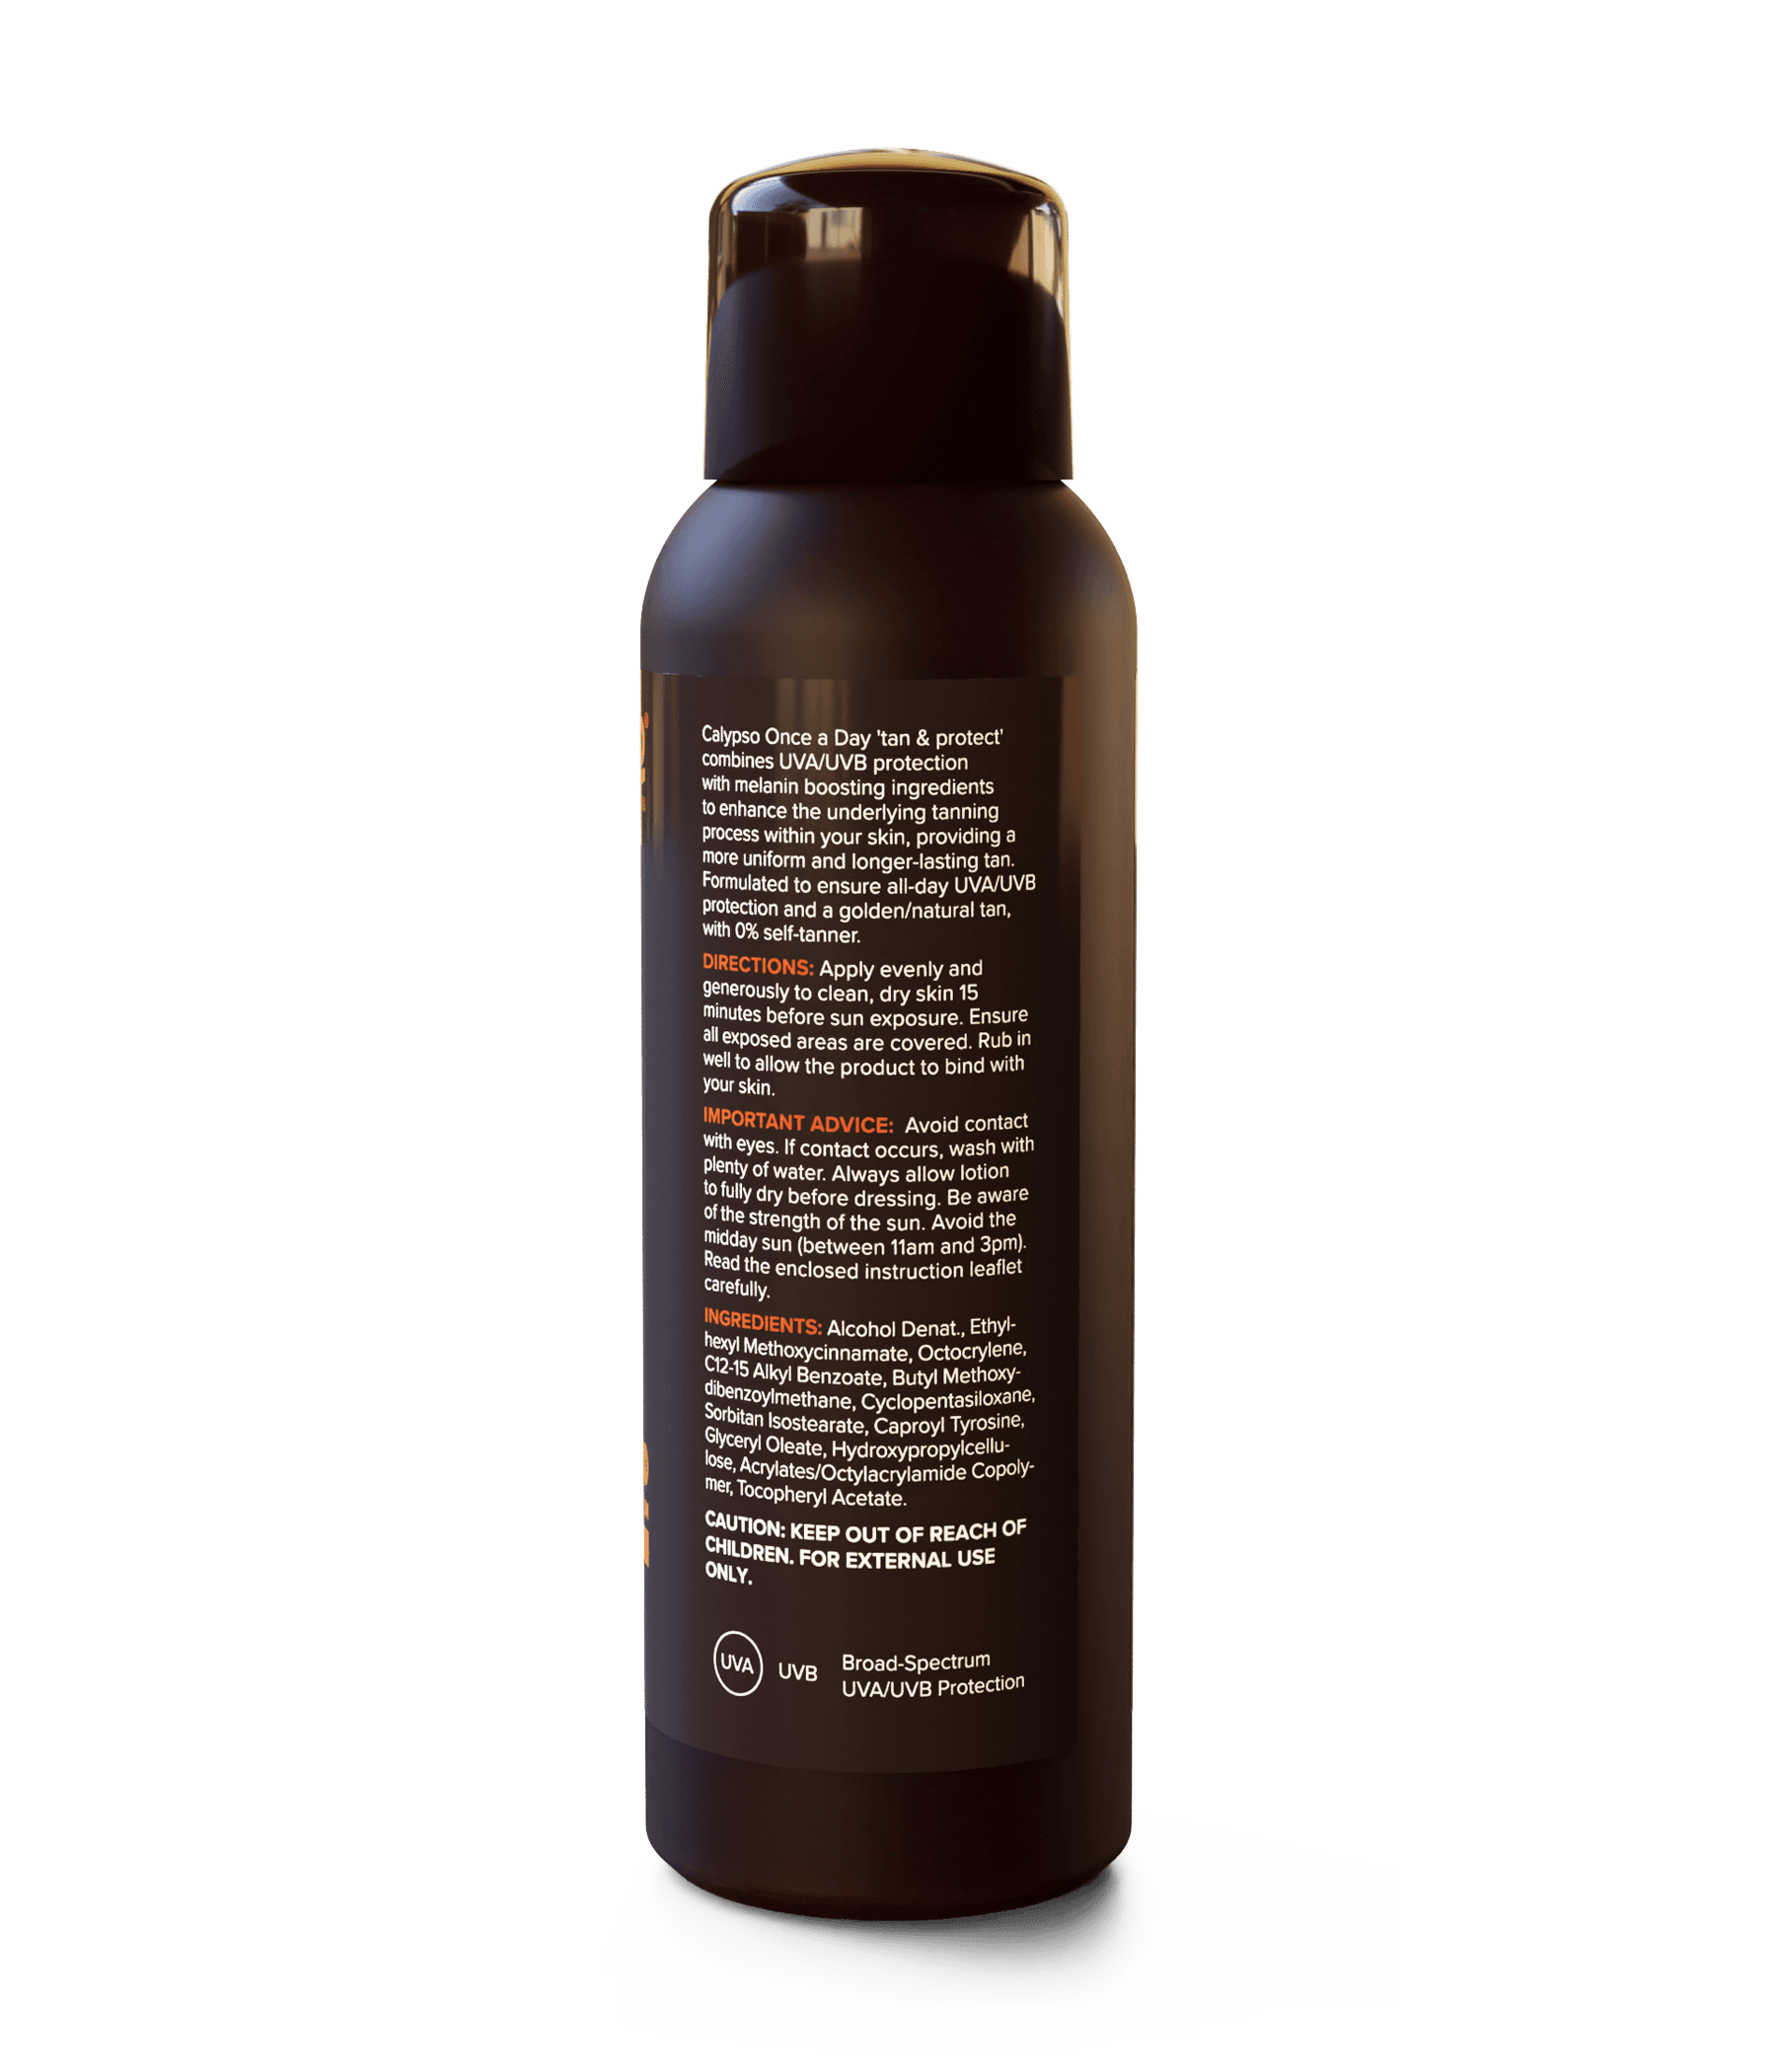 Calypso Once a Day Tan and Protect with Tan Extender SPF 15 bottle back